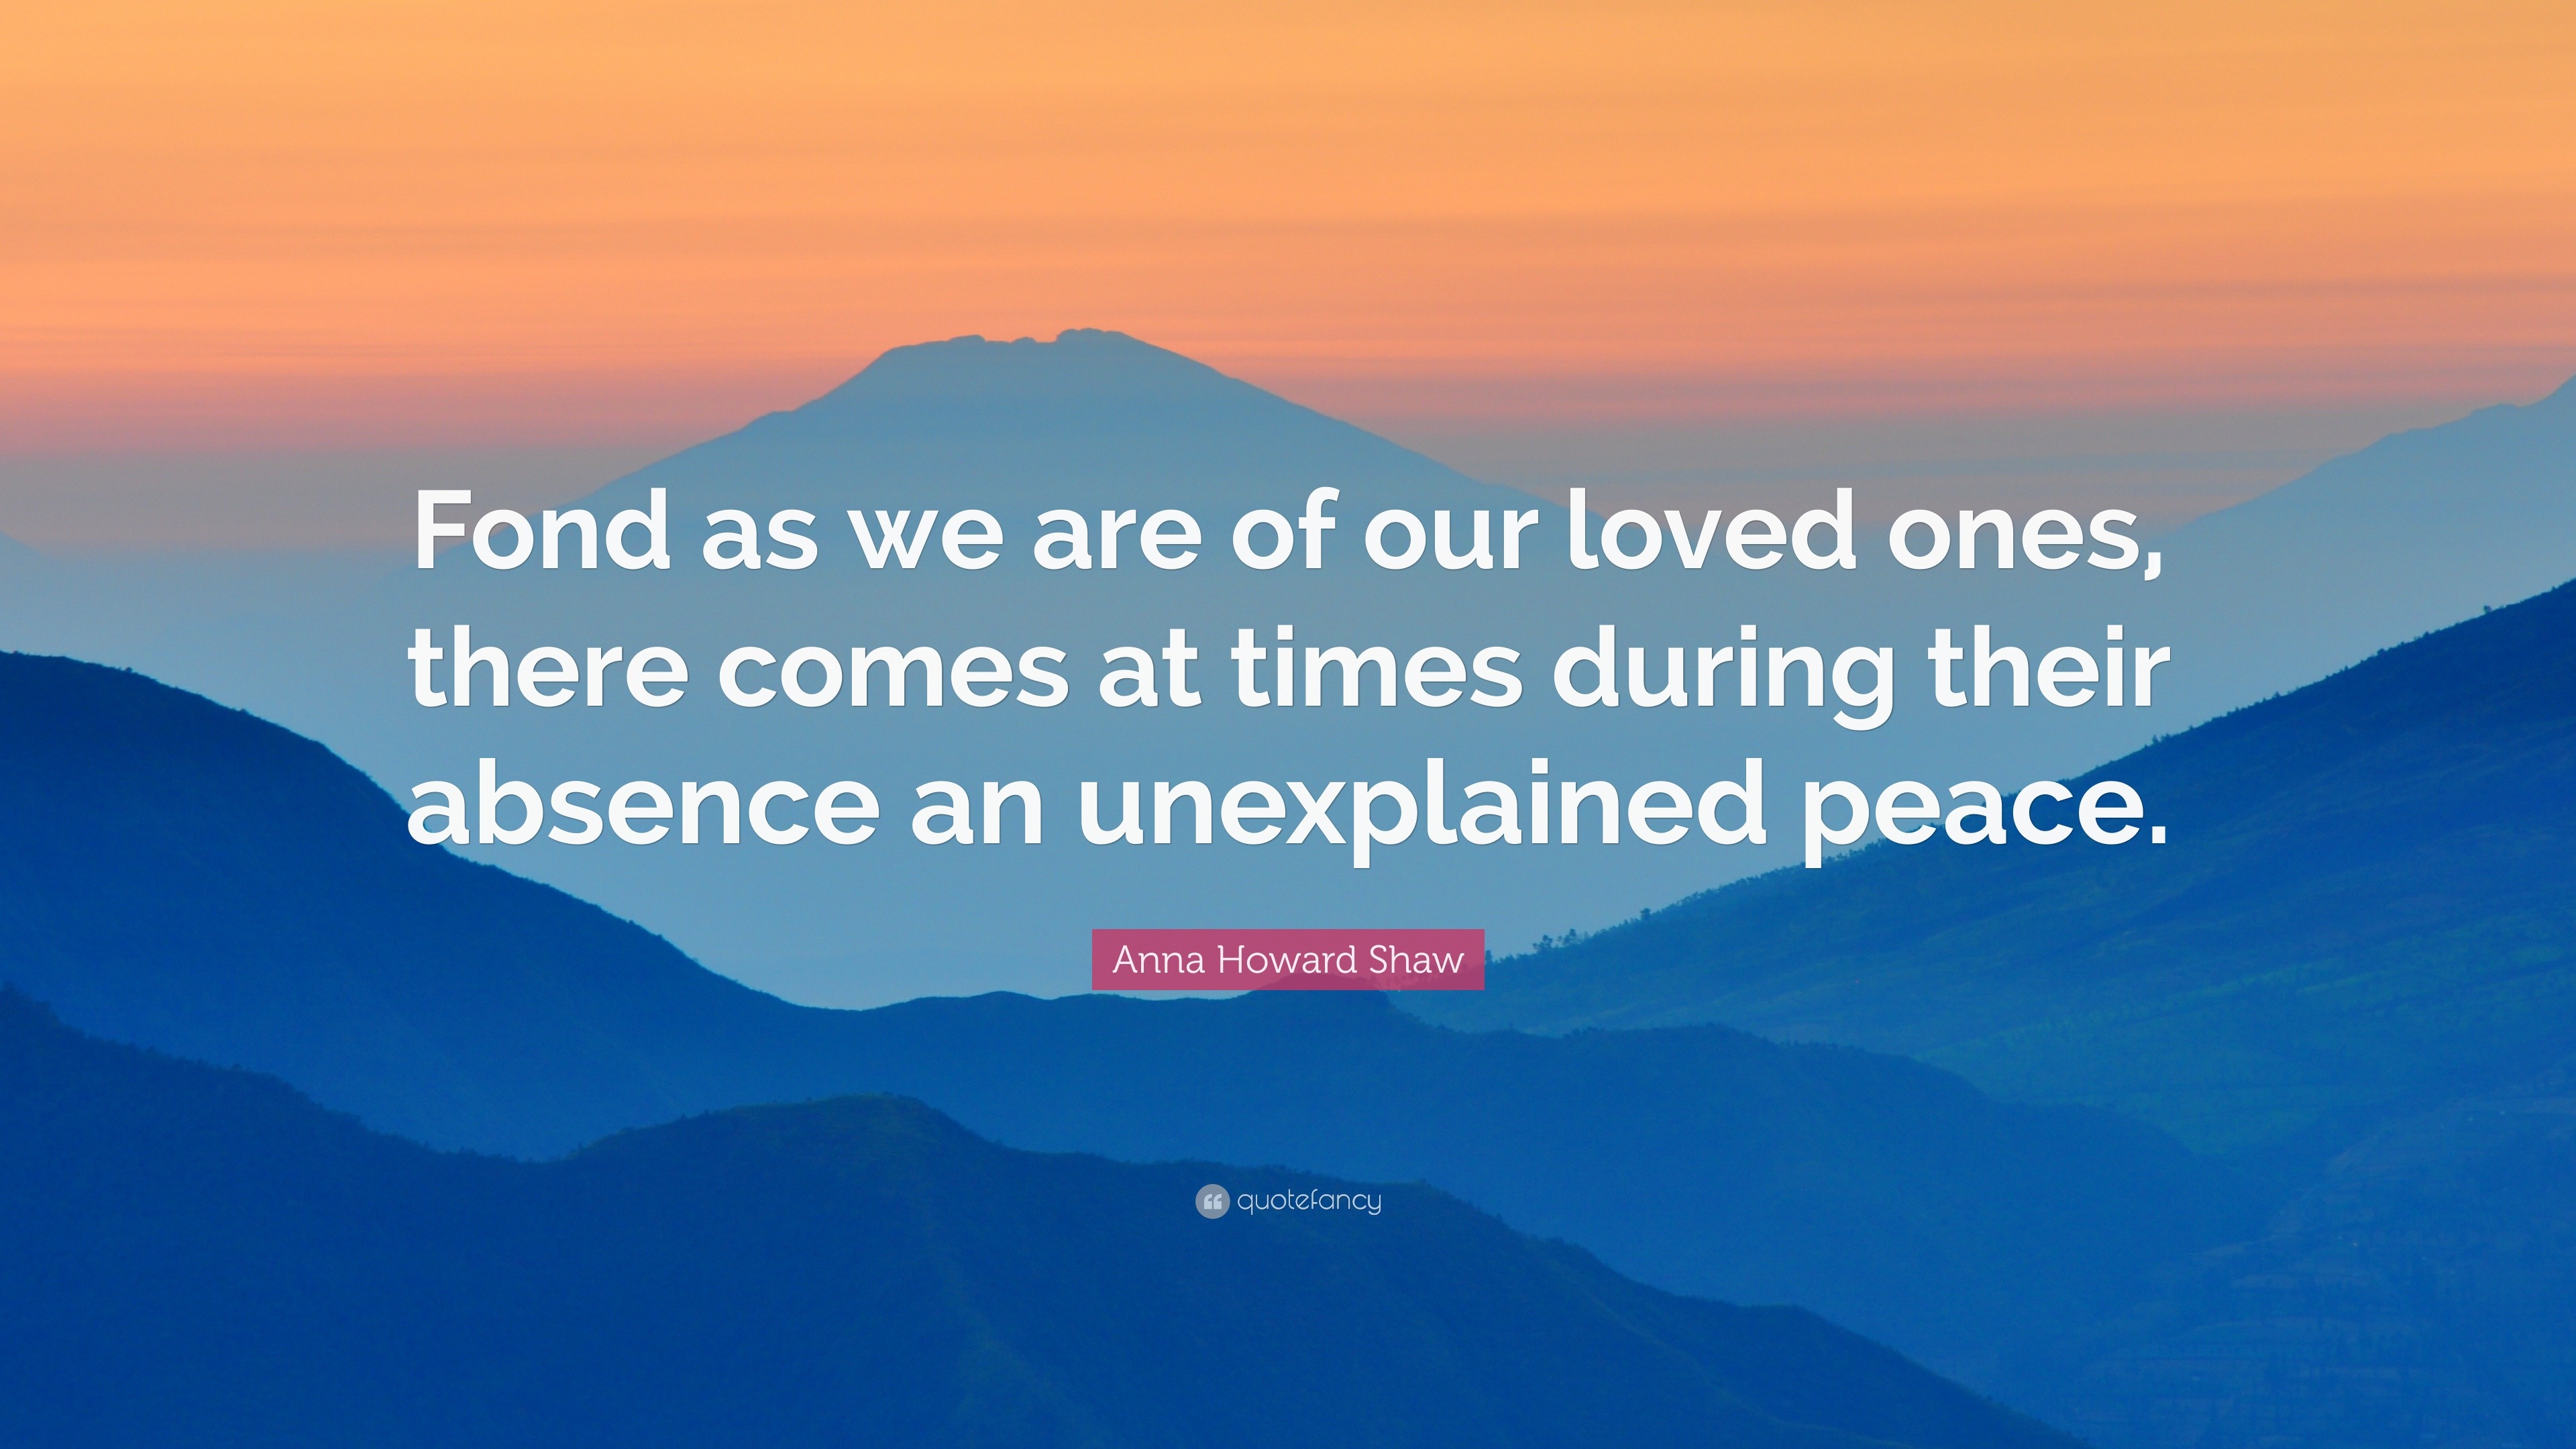 Anna Howard Shaw Quote: “Fond as we are of our loved ones, there comes ...